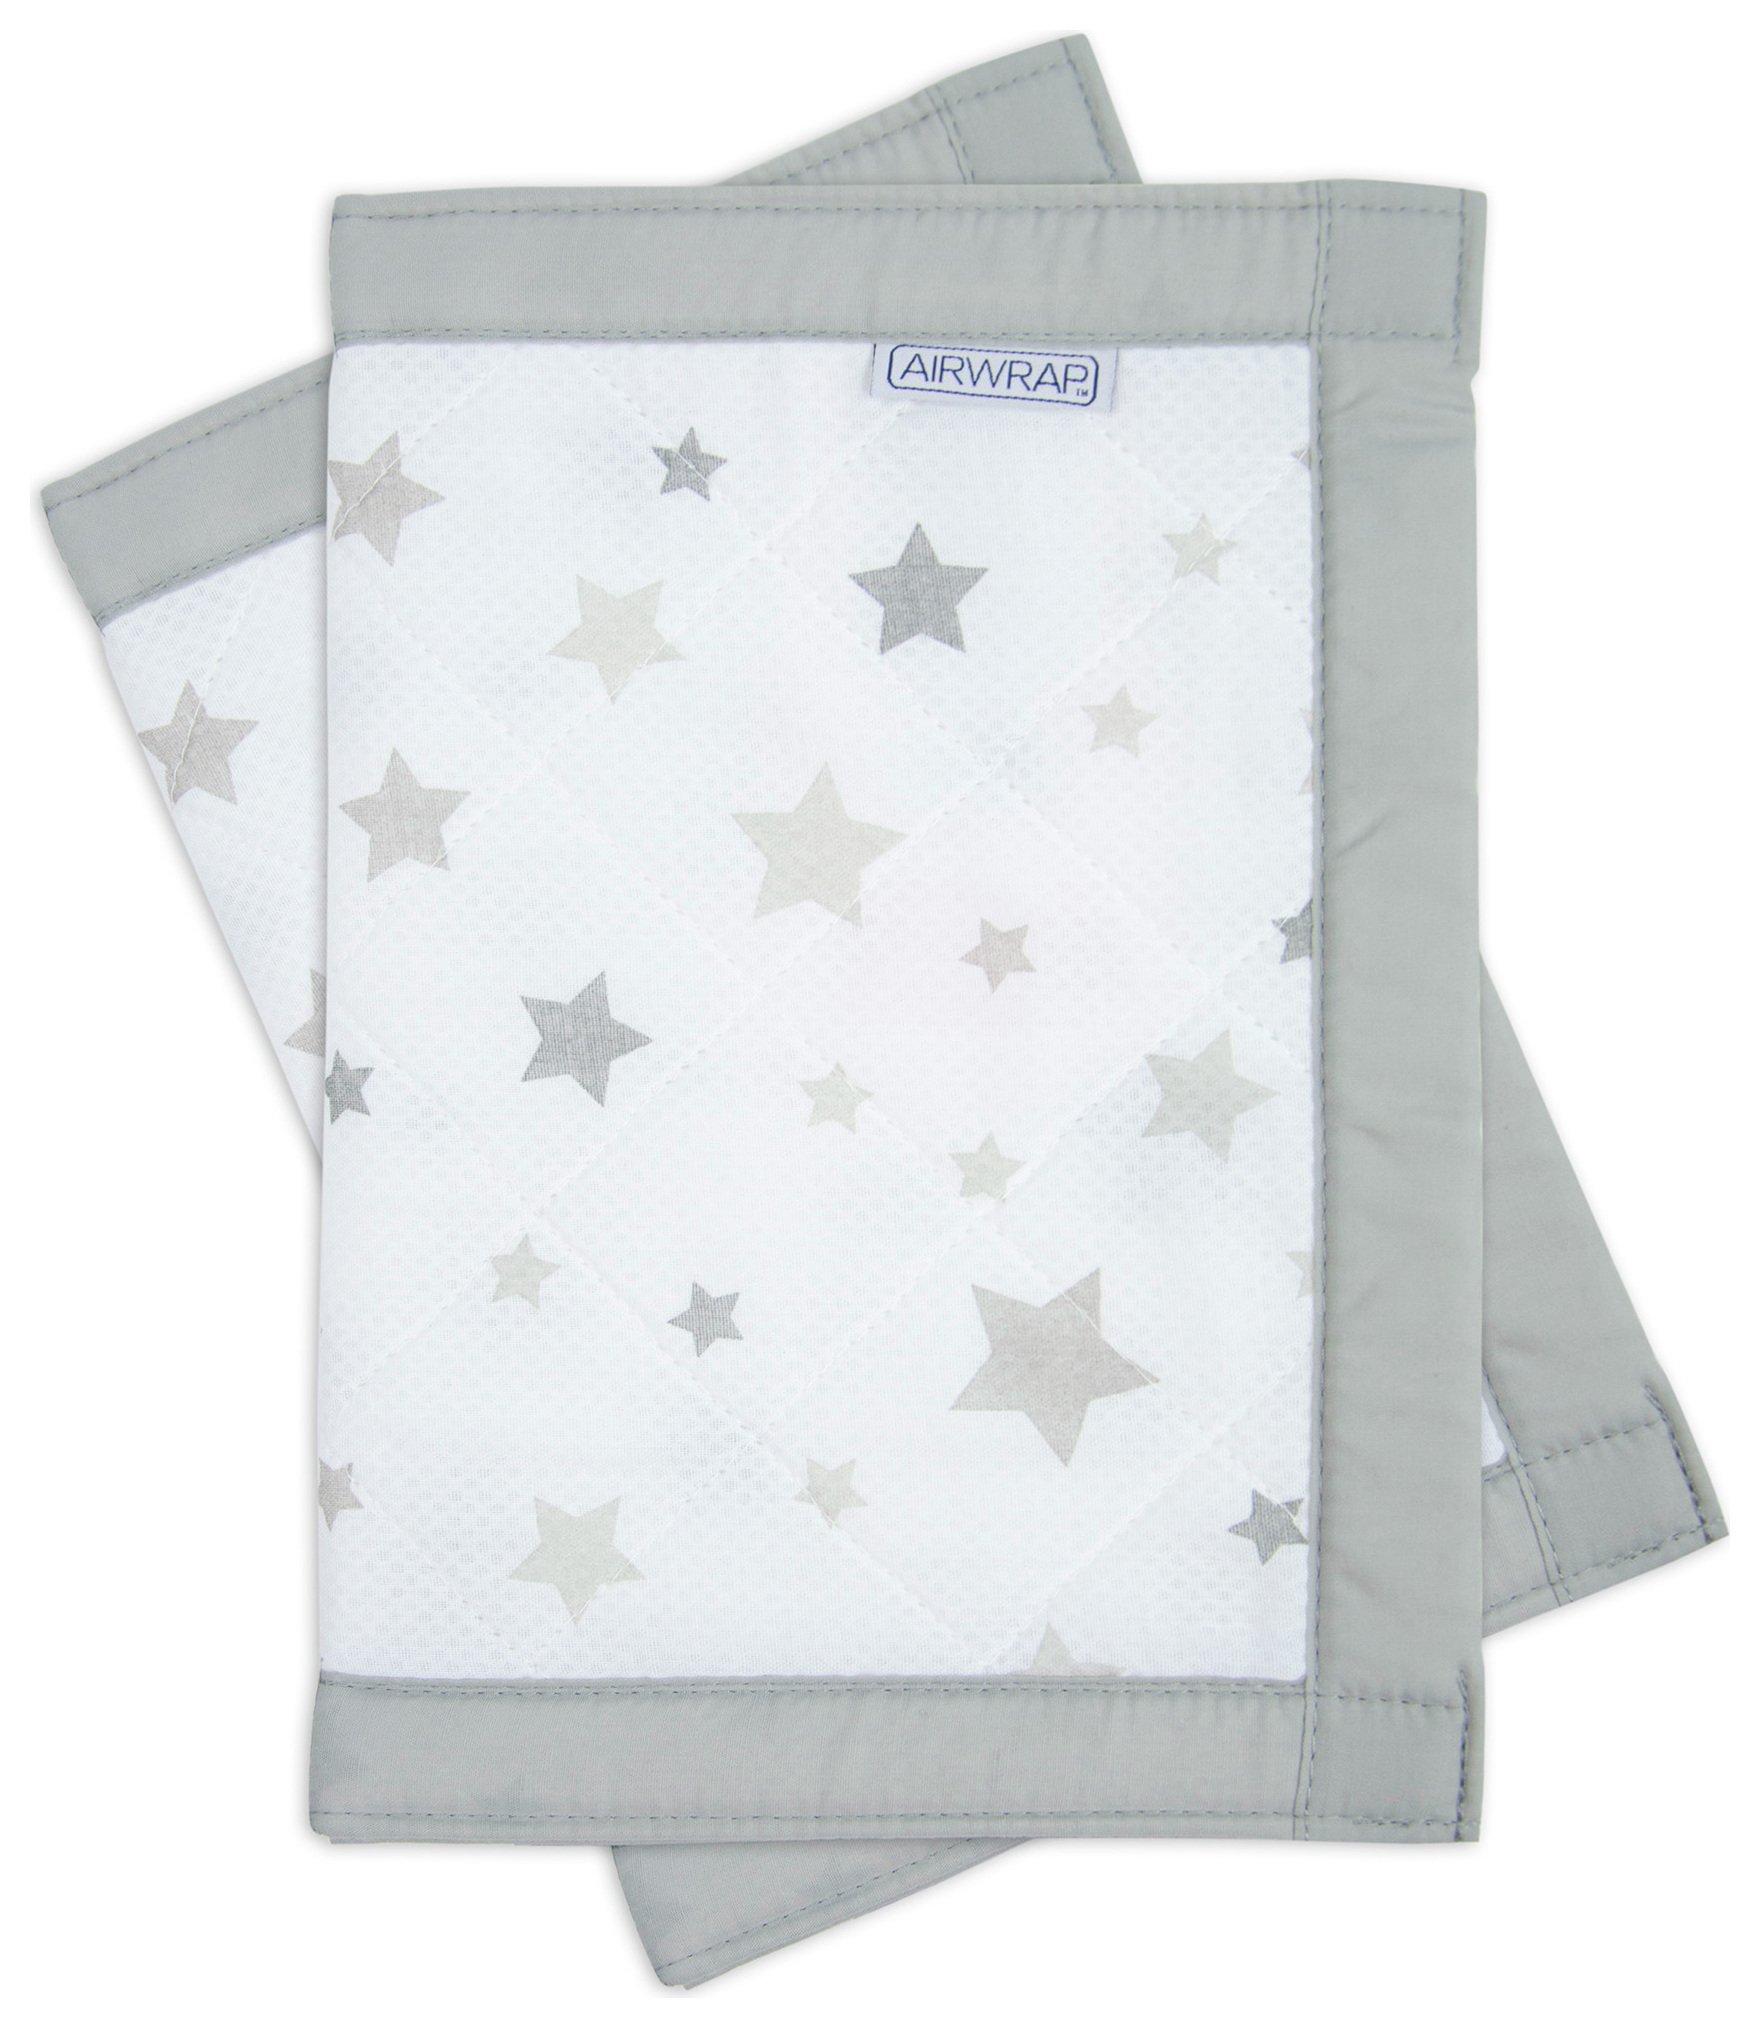 Airwrap - Printed 2 Sided - Cot Bumper - Silver Stars